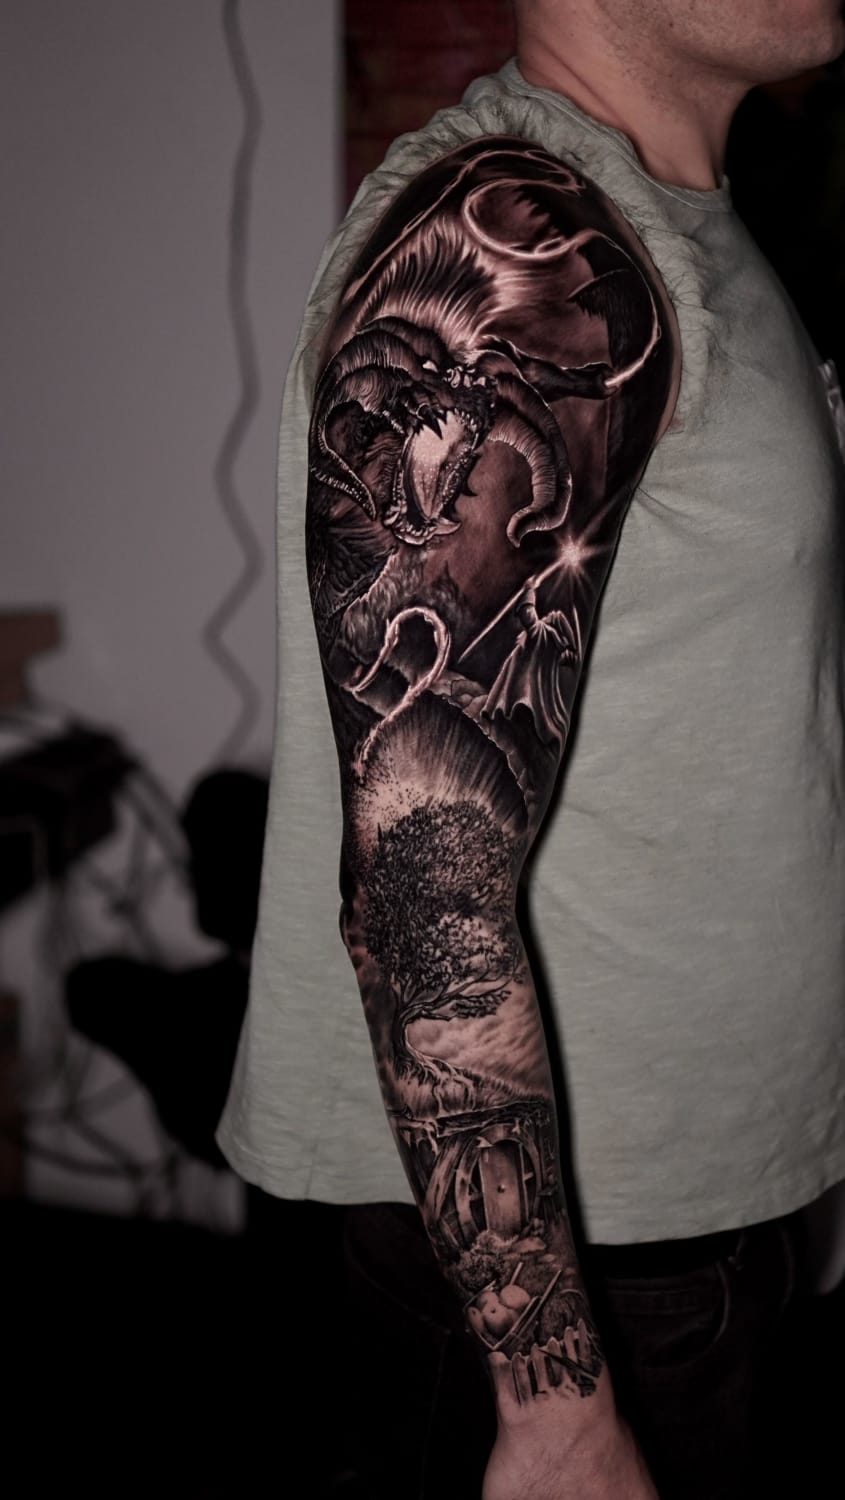 LOTR sleeve done by Dave Sevilla at Bad Decision Tattoo Studio in Branford CT